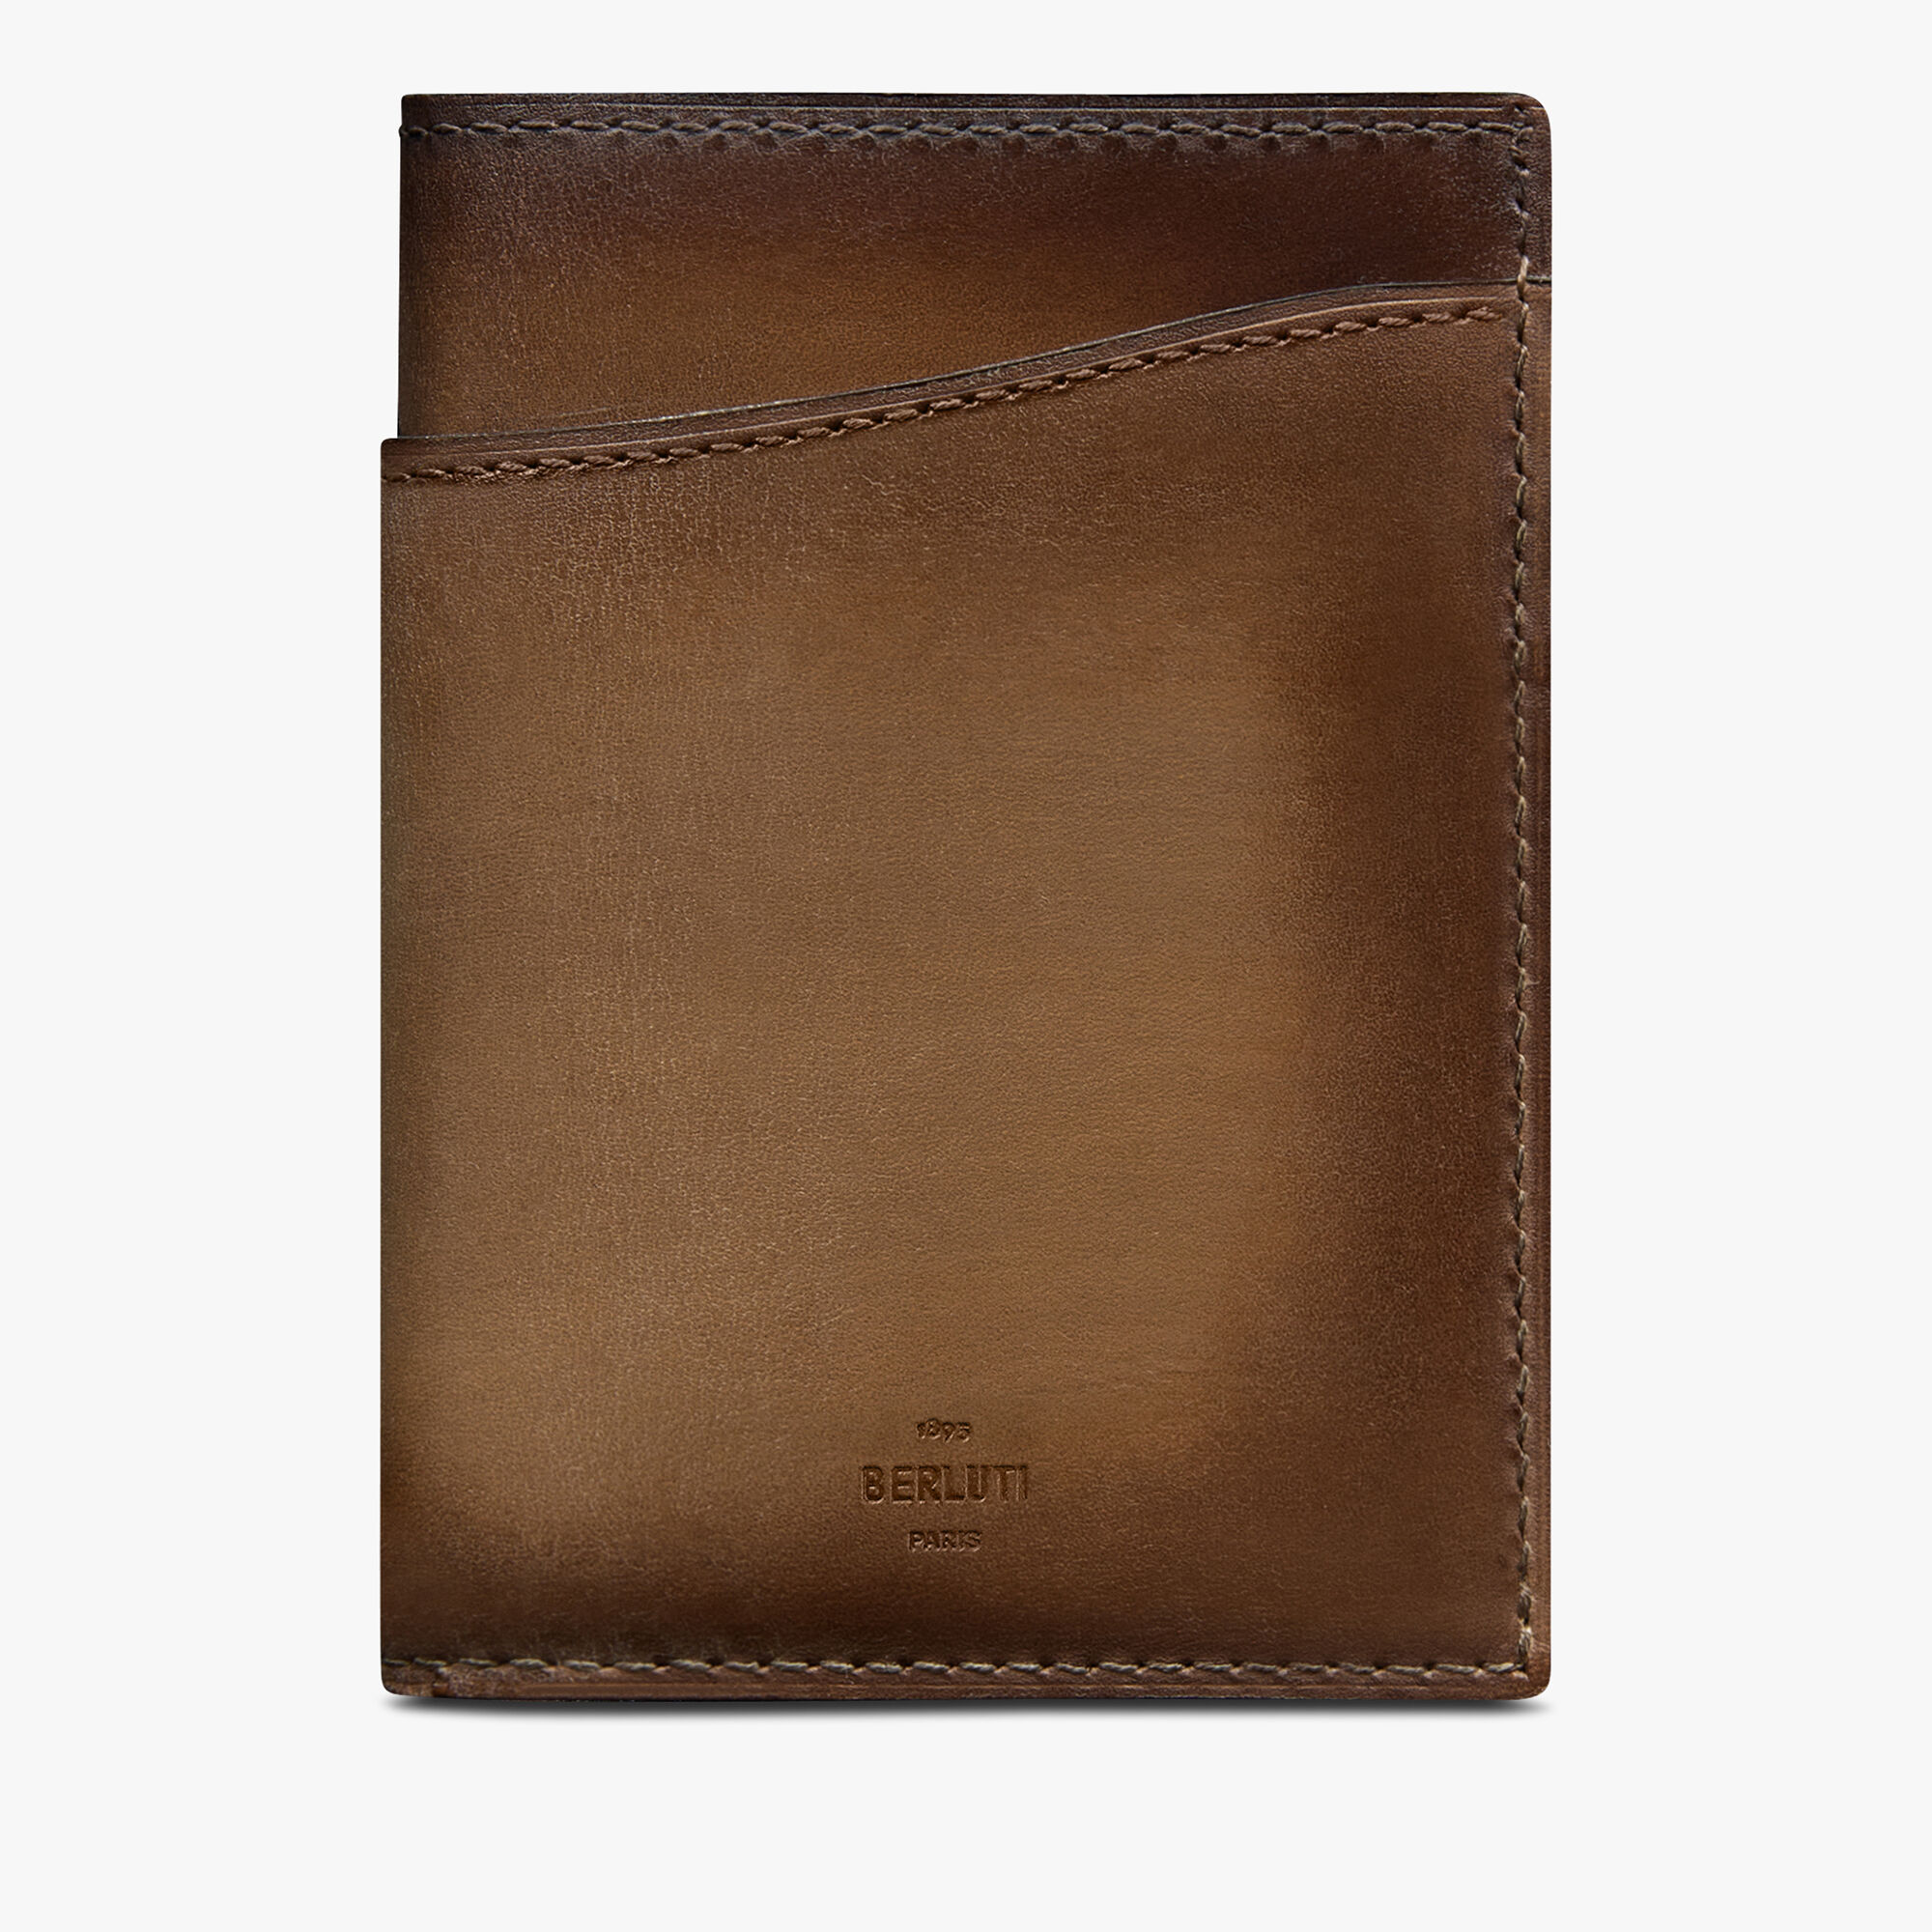 New wallet collections by Berluti - US